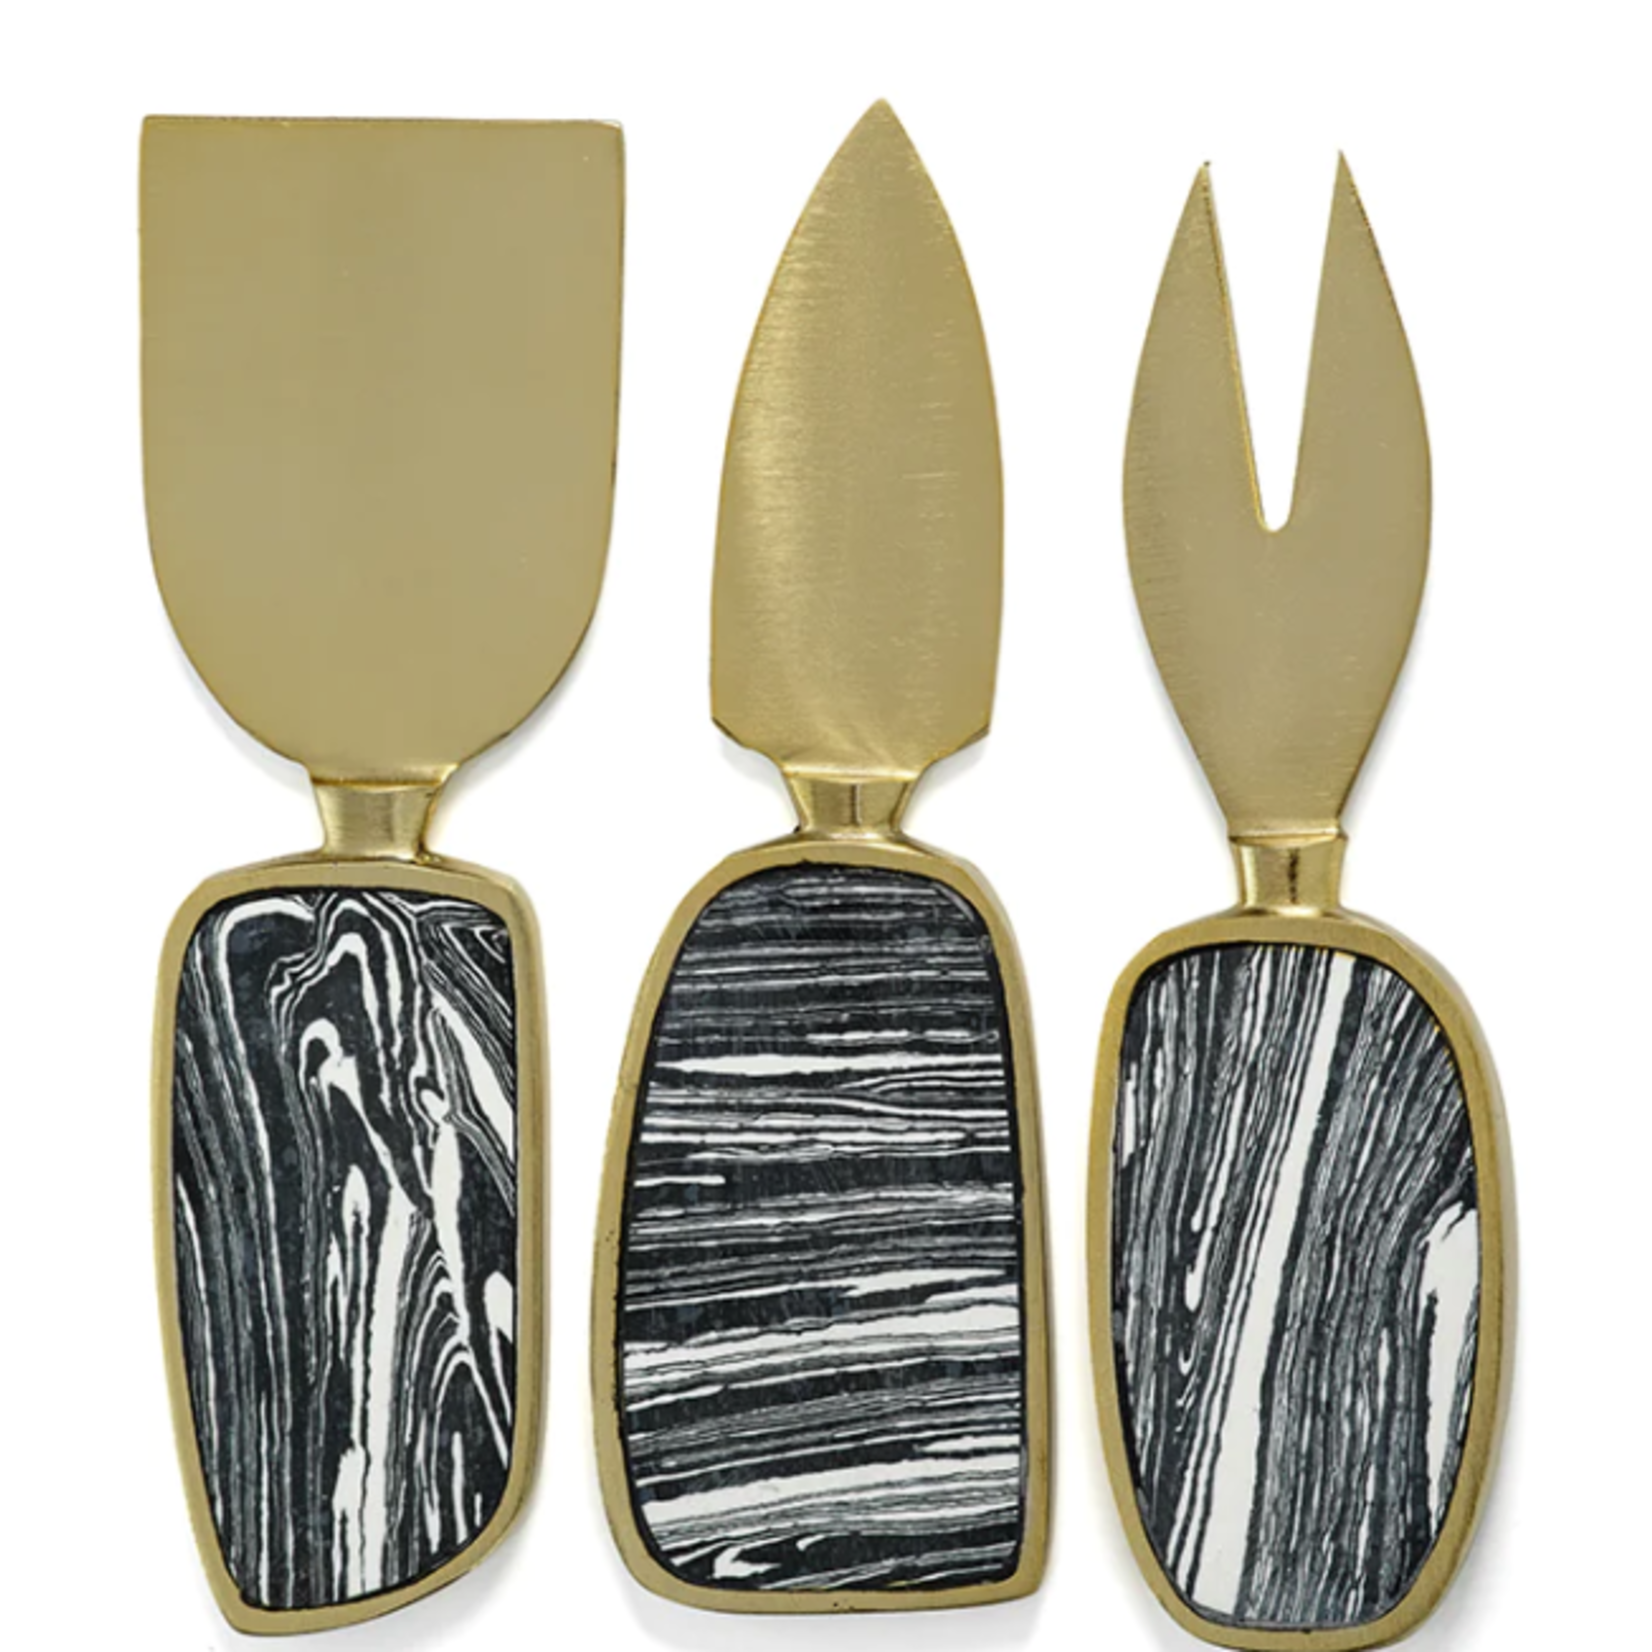 zodax Amalfi Set of 3 Cheese Tools - Black with Gold